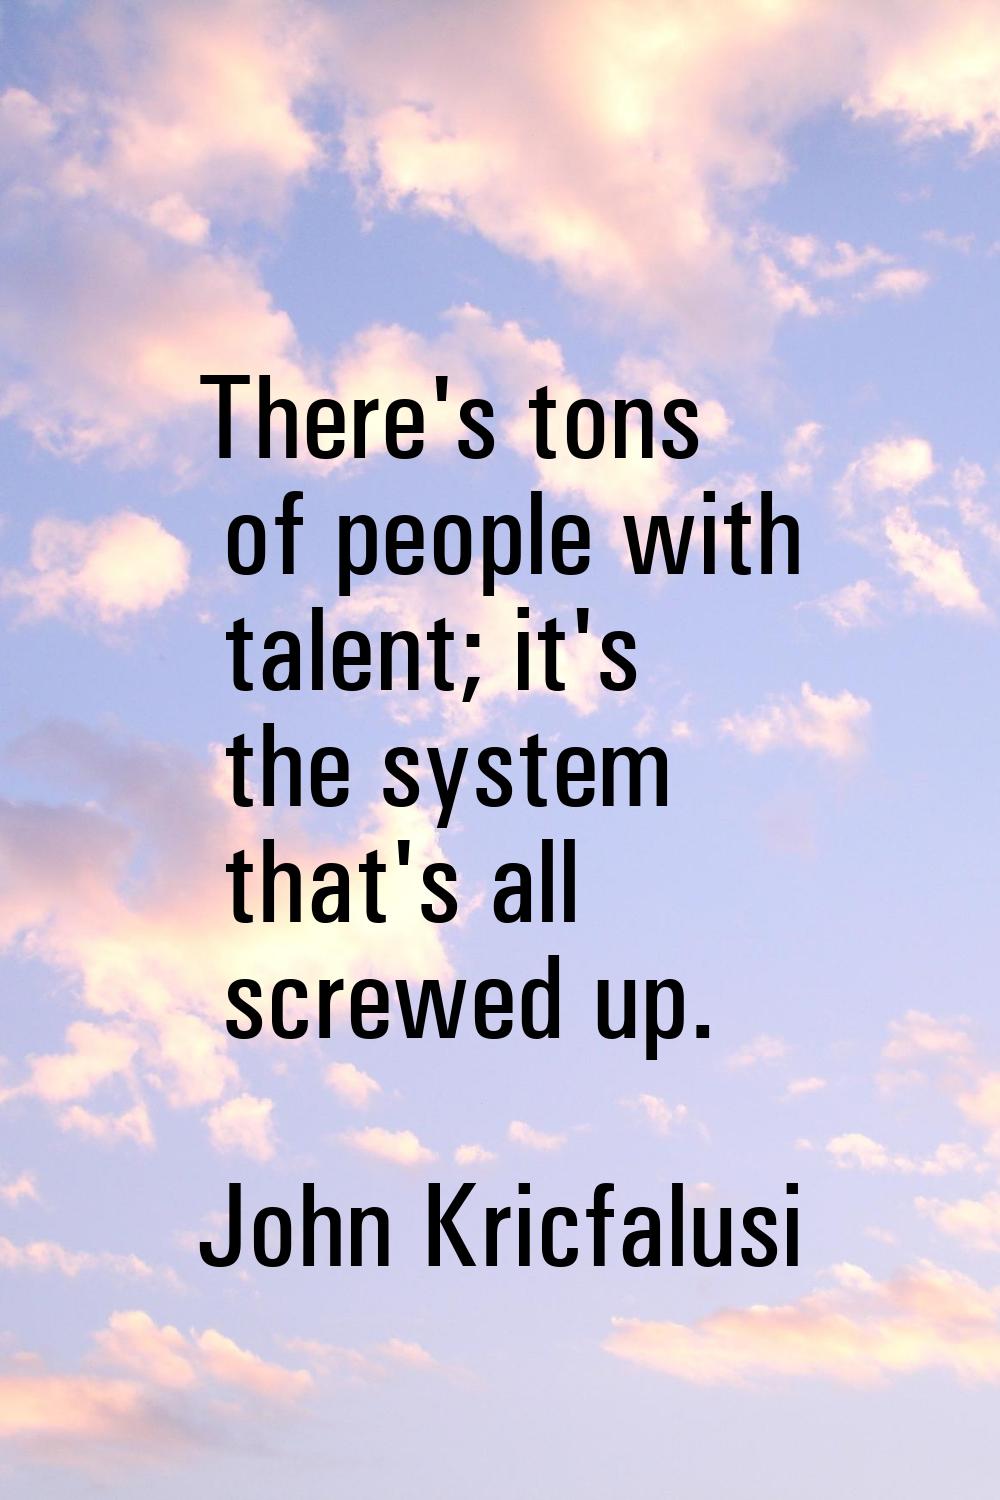 There's tons of people with talent; it's the system that's all screwed up.